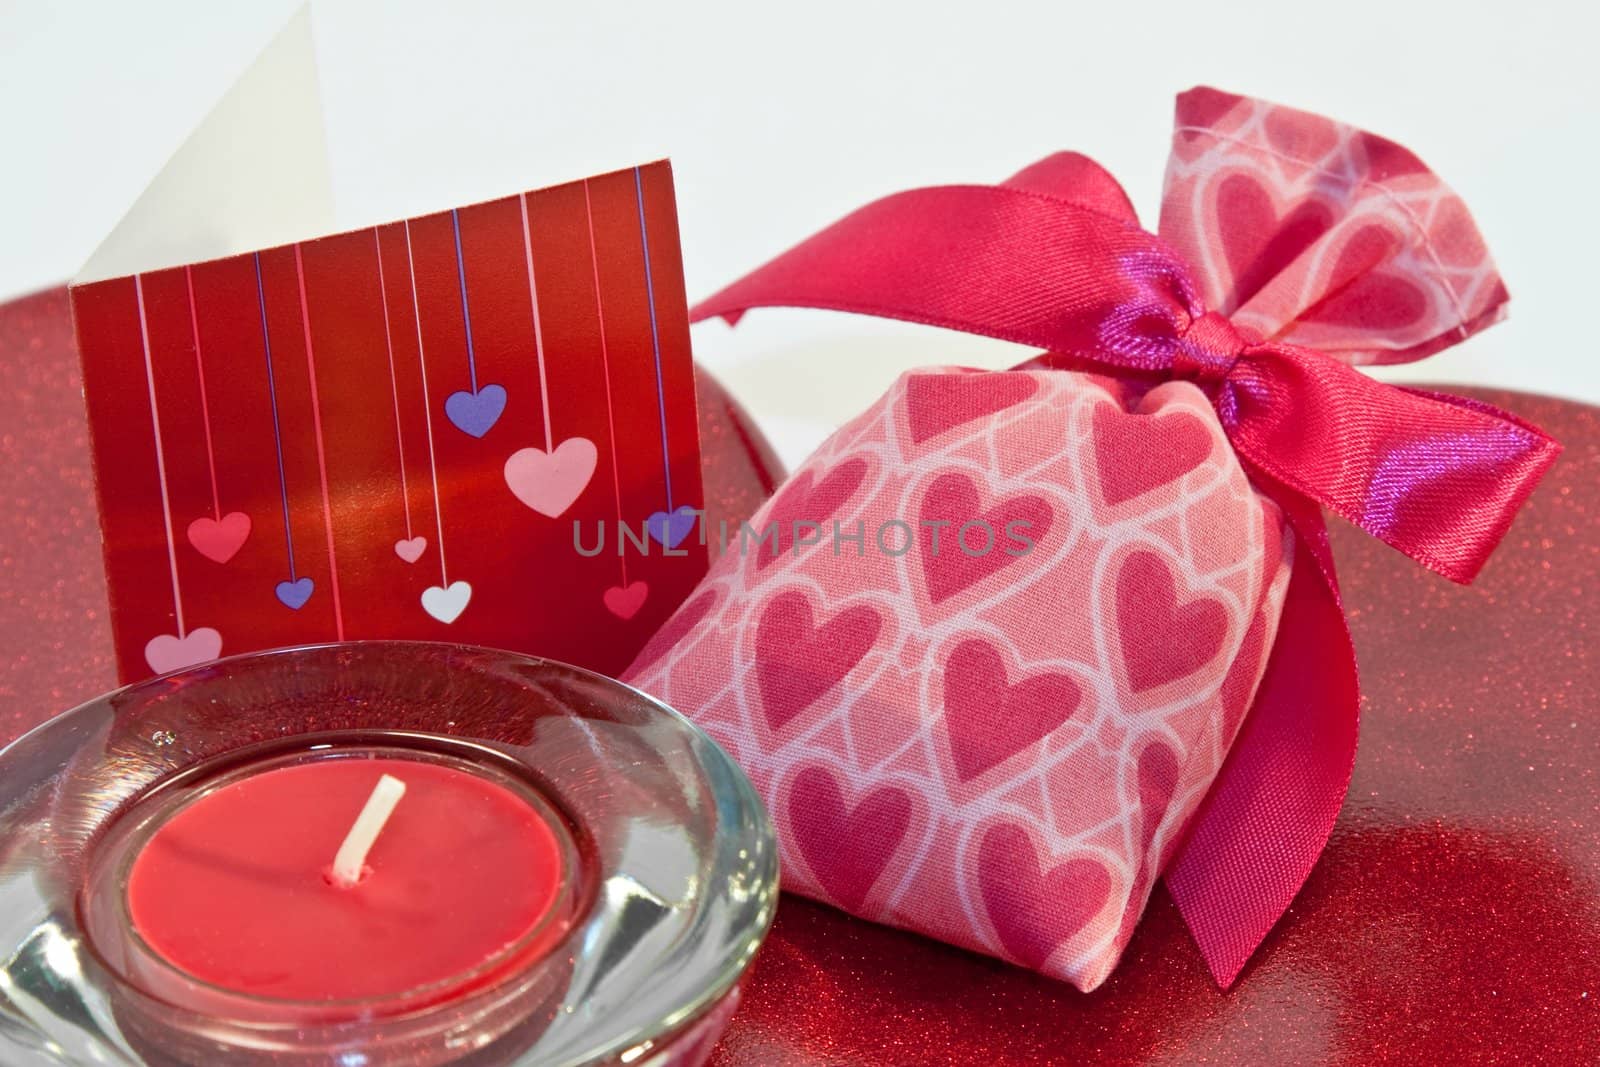 red metallic heart dish with heart sachet with card and candle